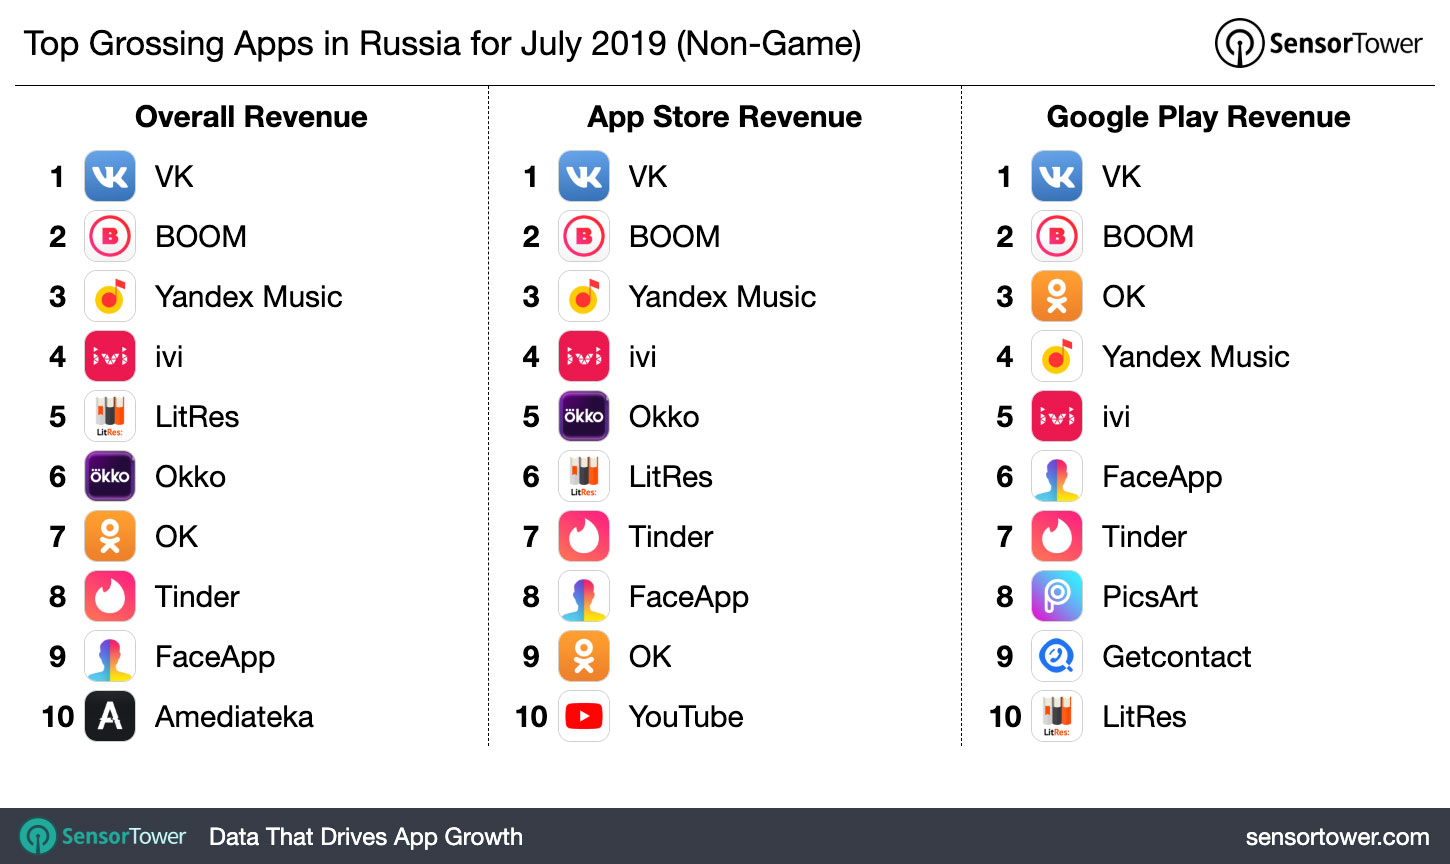 Top Grossing Apps in Russia for July 2019